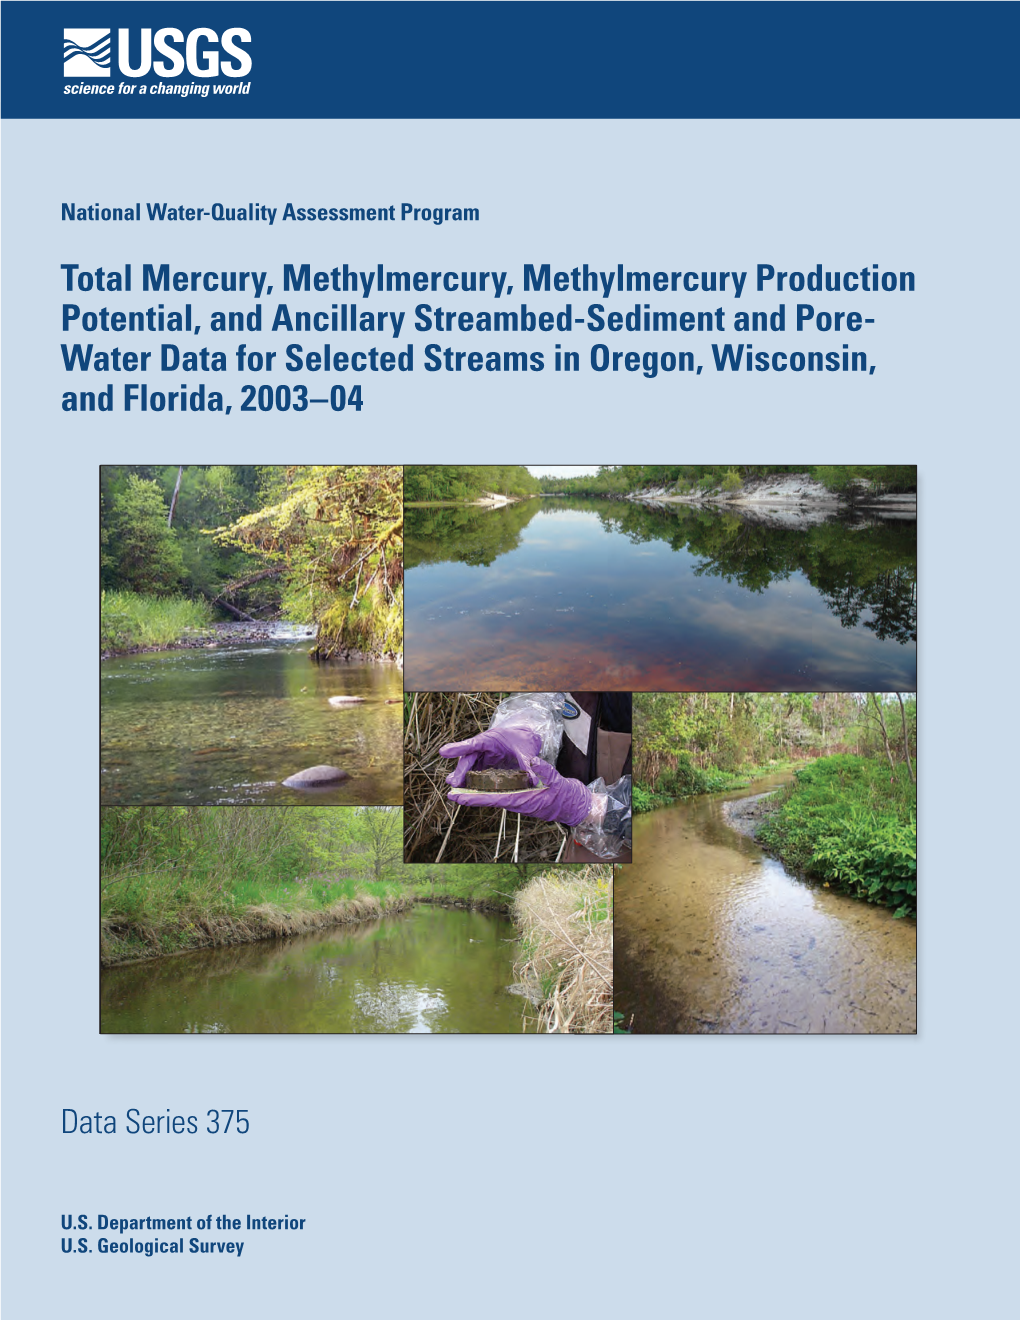 Total Mercury, Methylmercury, Methylmercury Production Potential